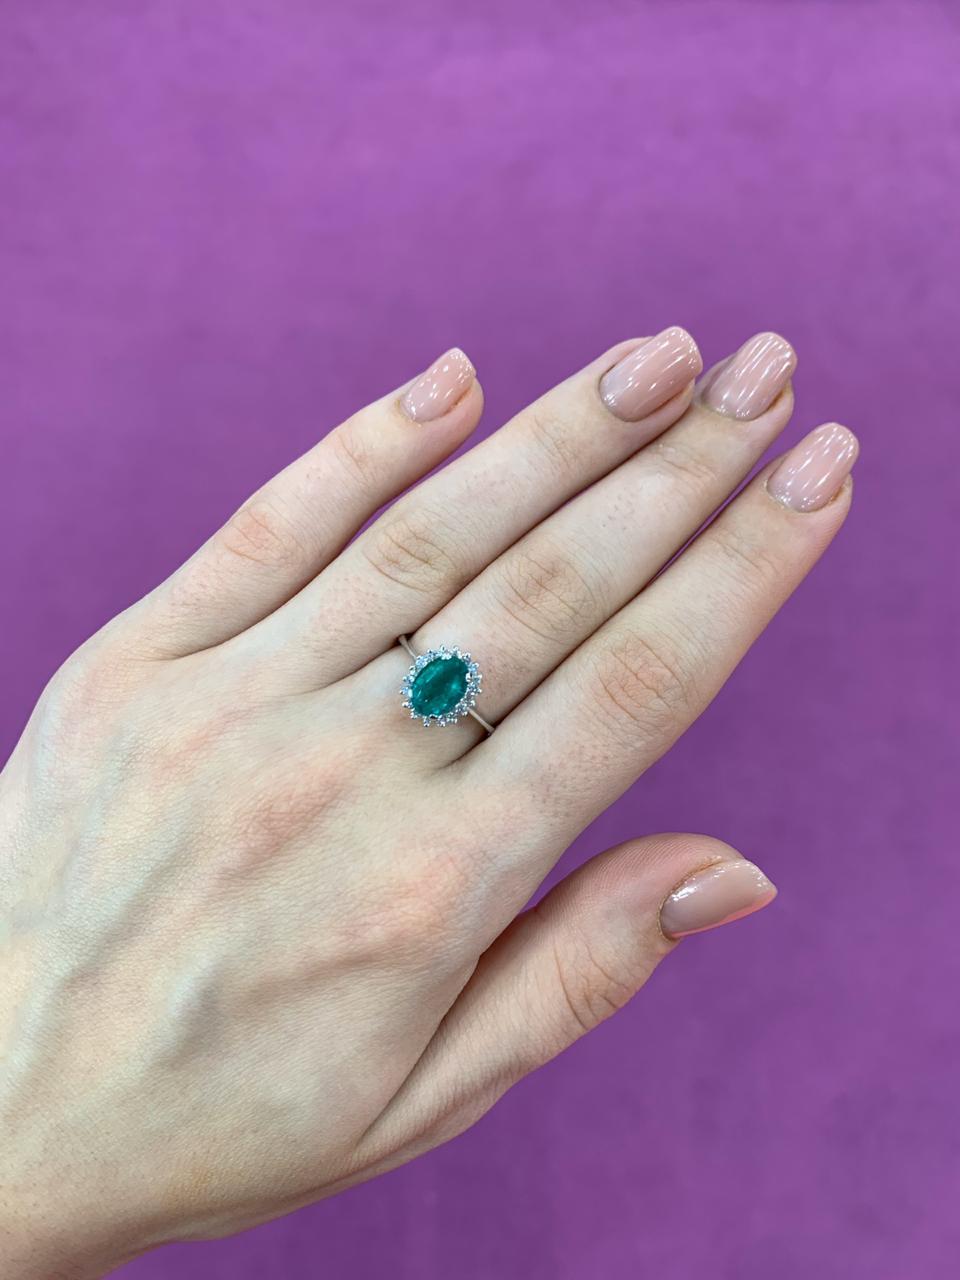 Ring  Gold 14 K
Diamond 18-Round 57-0,209-3/5A
Emerald 1-Oval-1,445 4/(5)З₁A
Weight 2,21
Size 17

With a heritage of ancient fine Swiss jewelry traditions, NATKINA is a Geneva based jewellery brand, which creates modern jewellery masterpieces